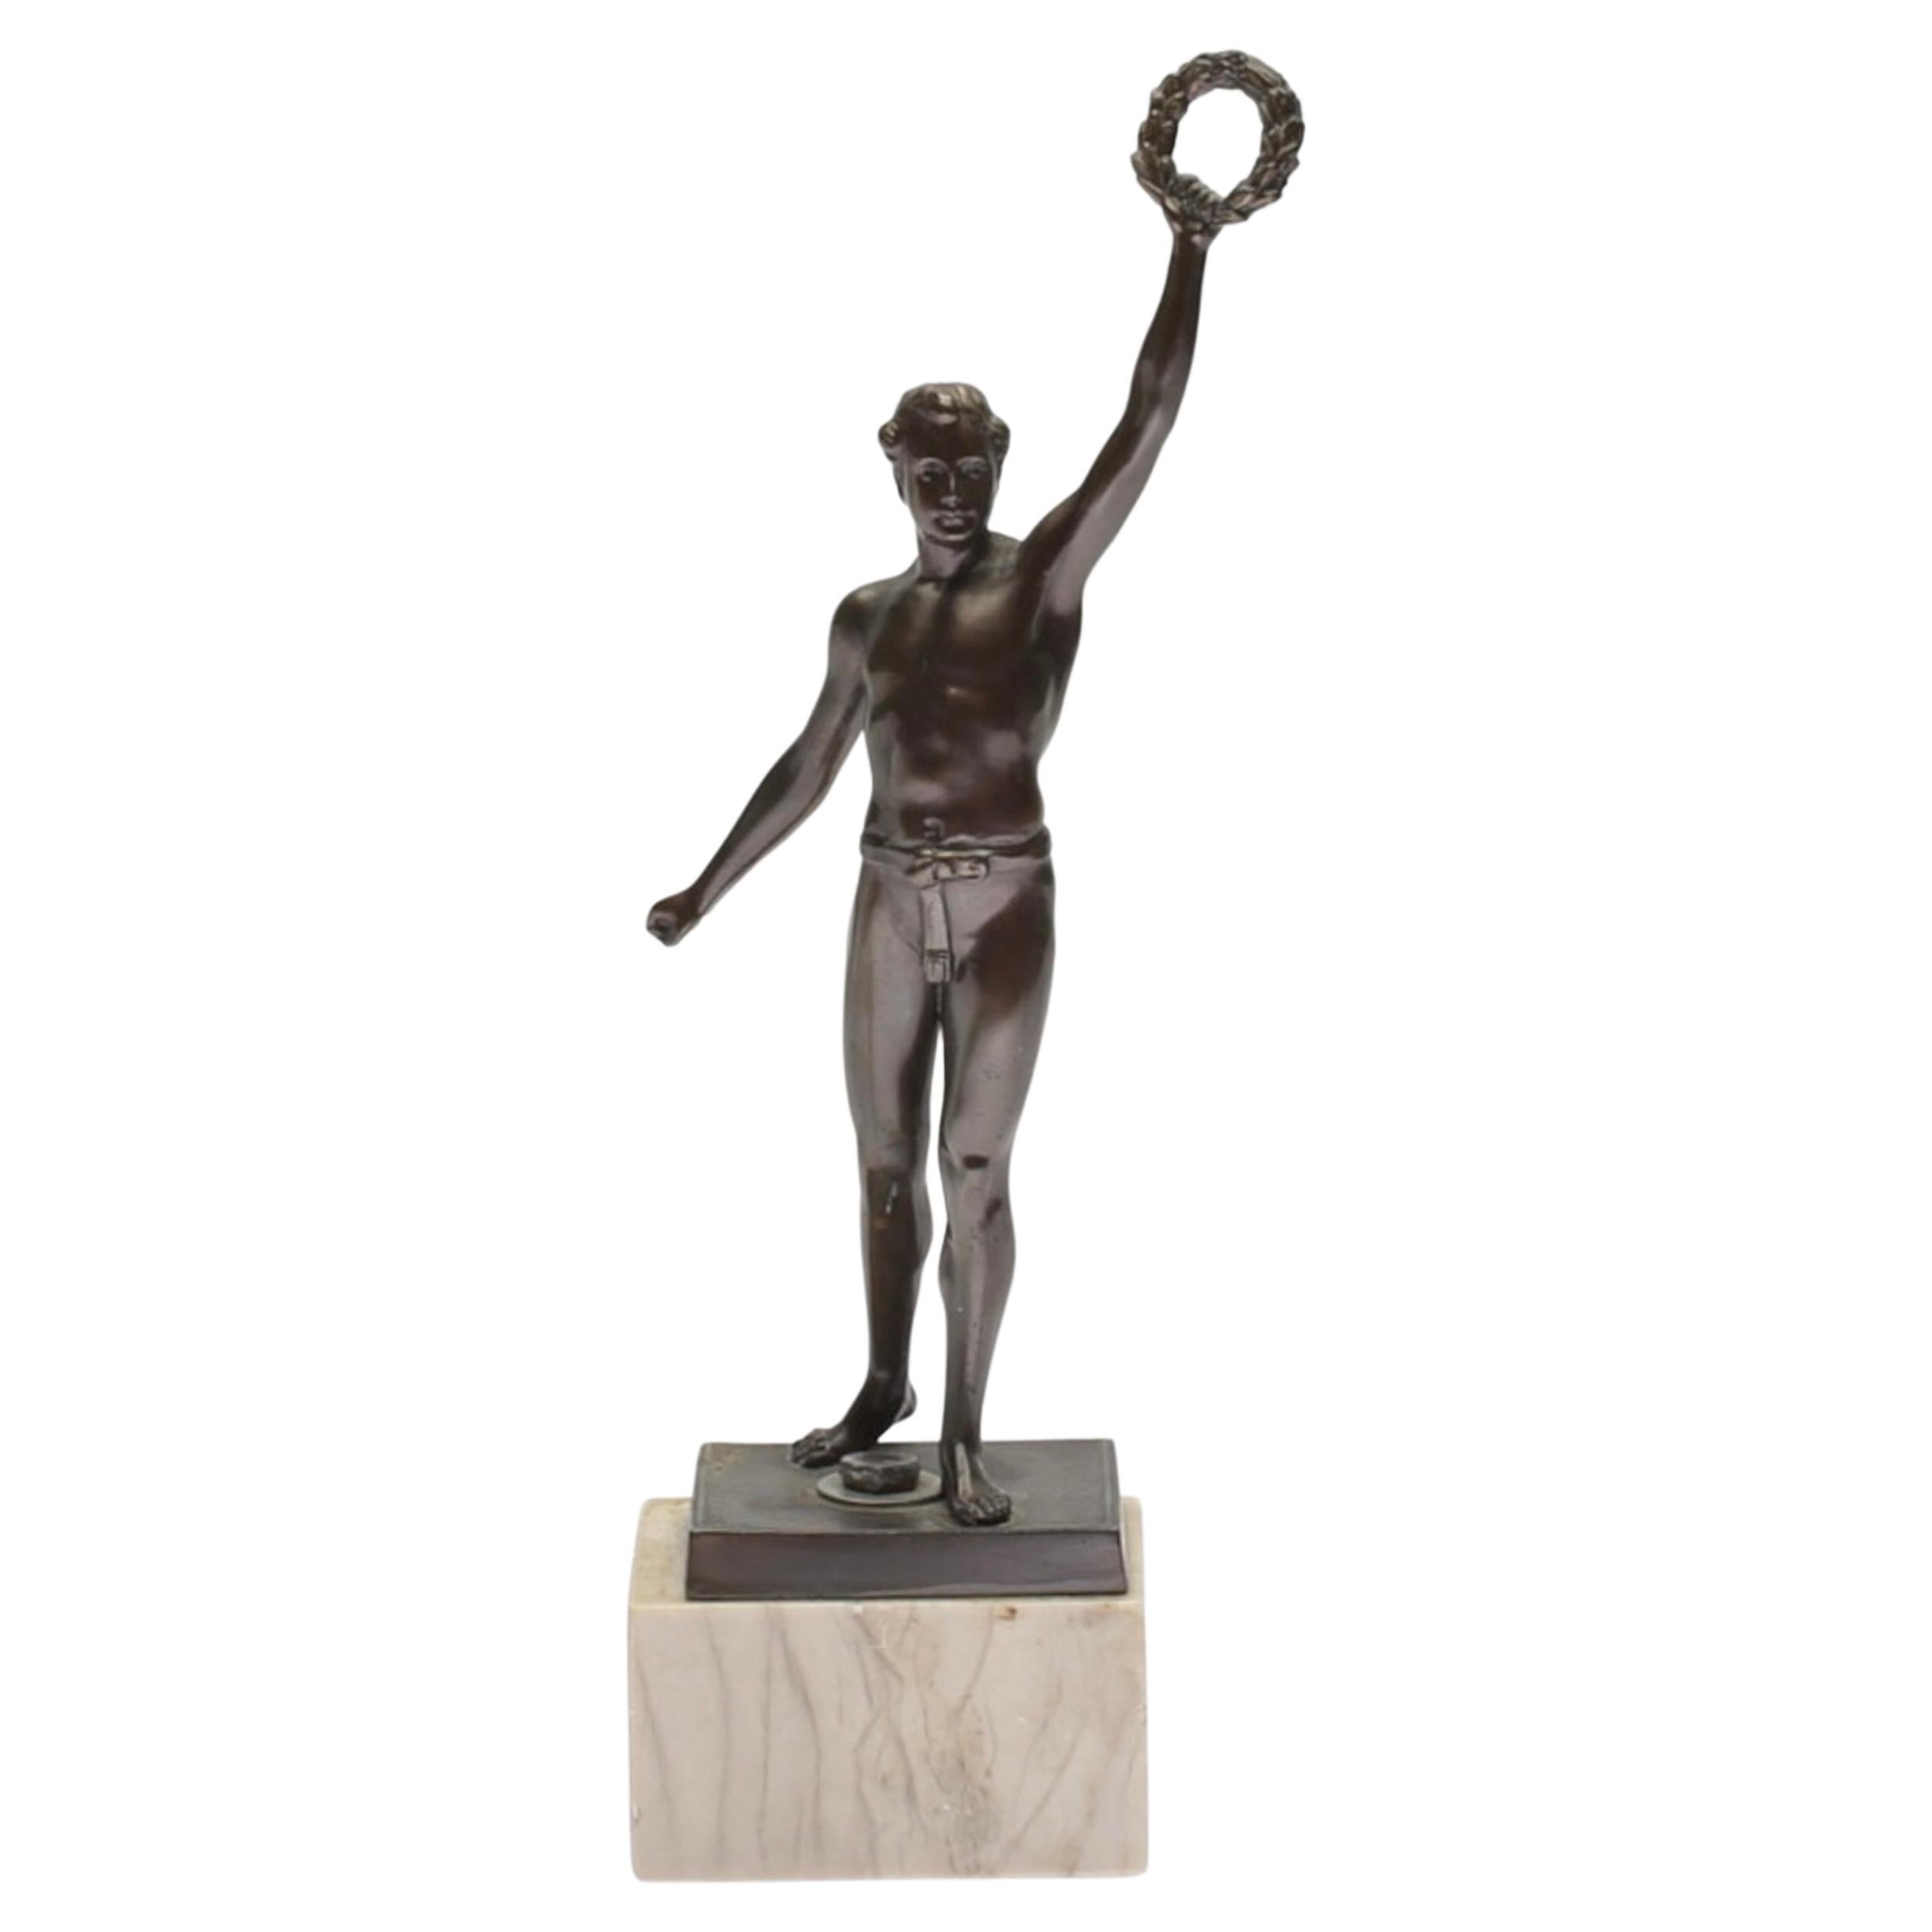 20th Century Patinated Metal Sculpture Figure of an Athlete